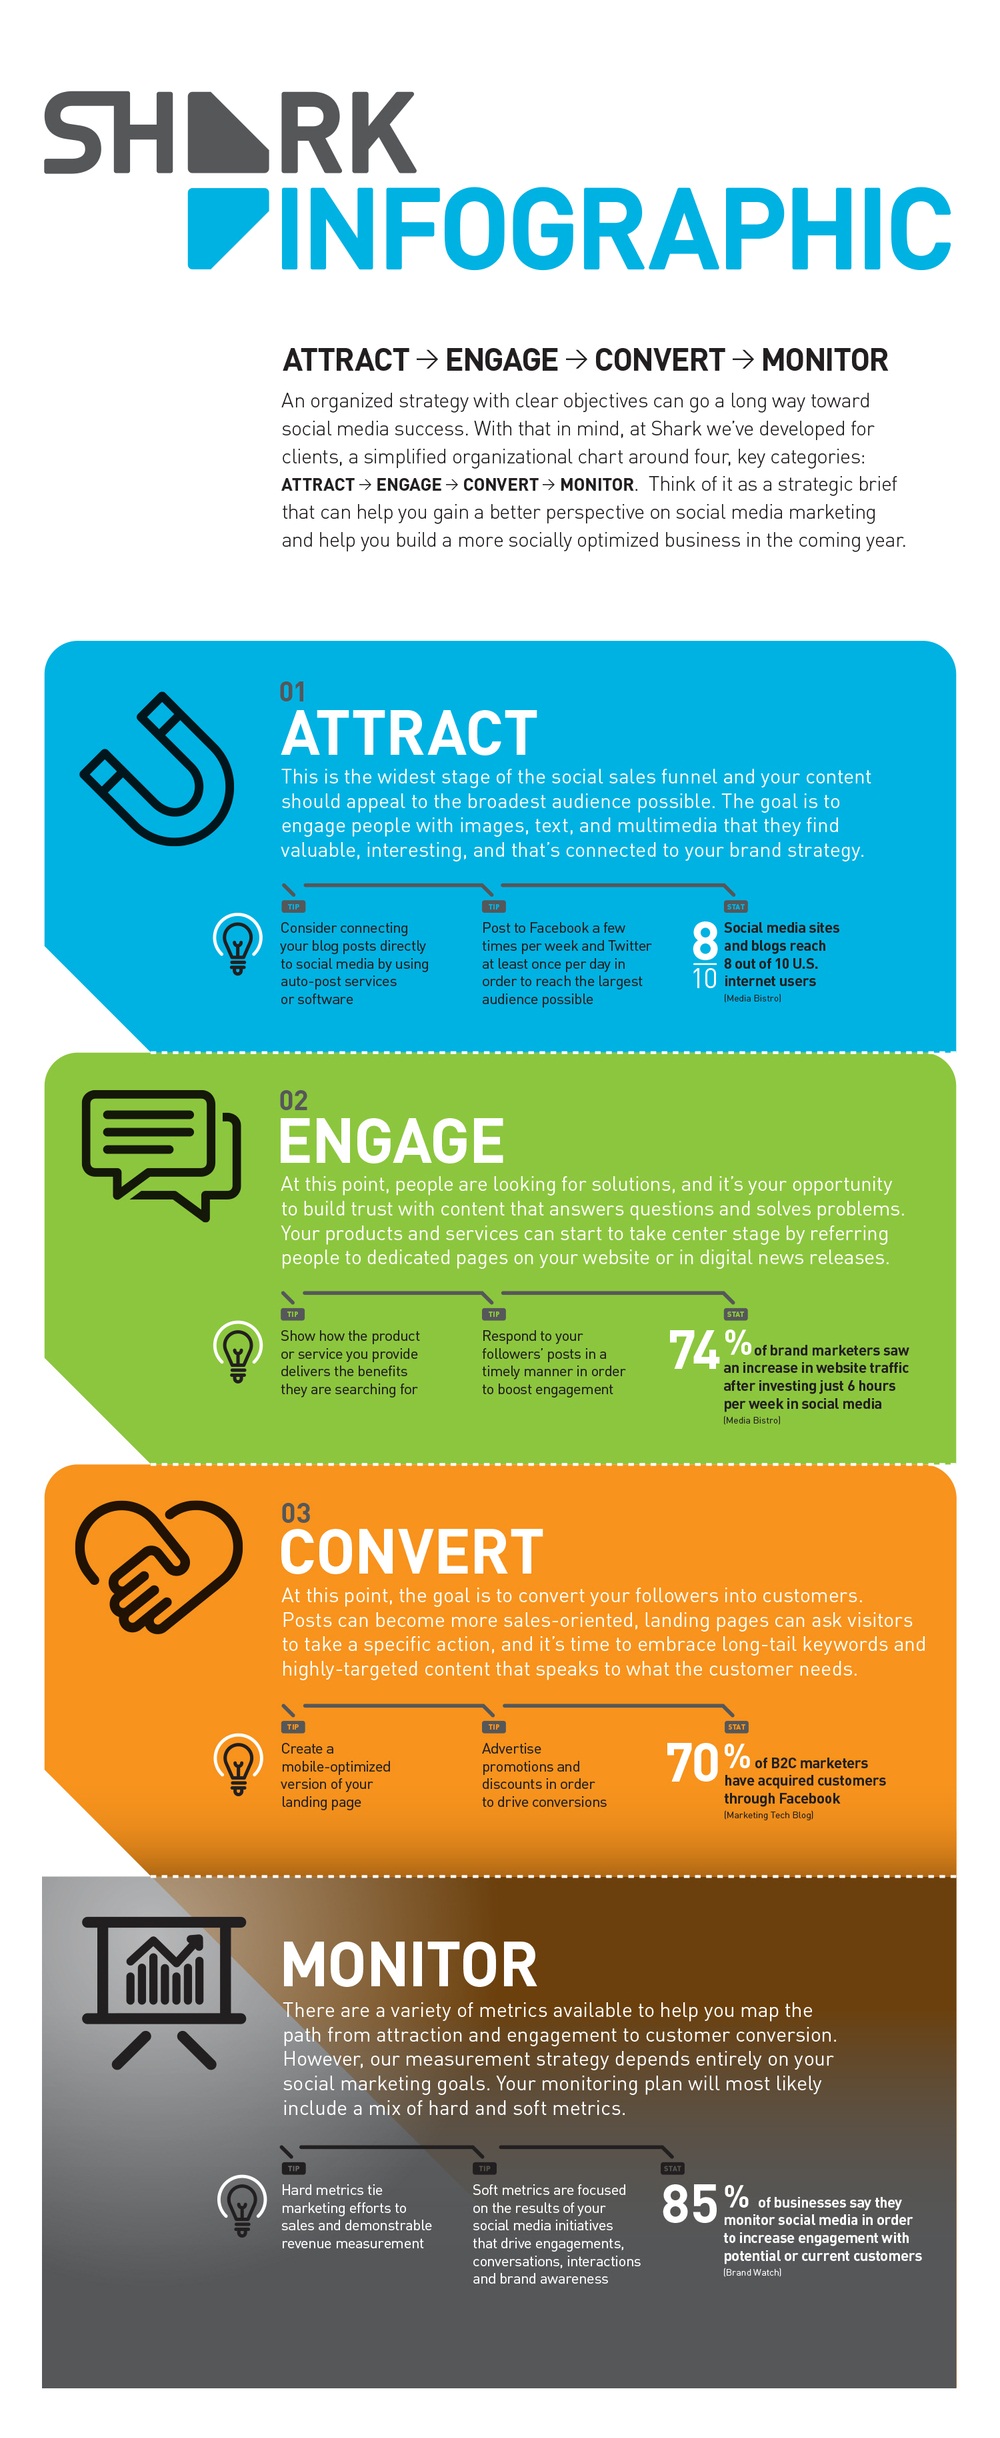 A New Social Media Marketing Strategy, In an Infographic